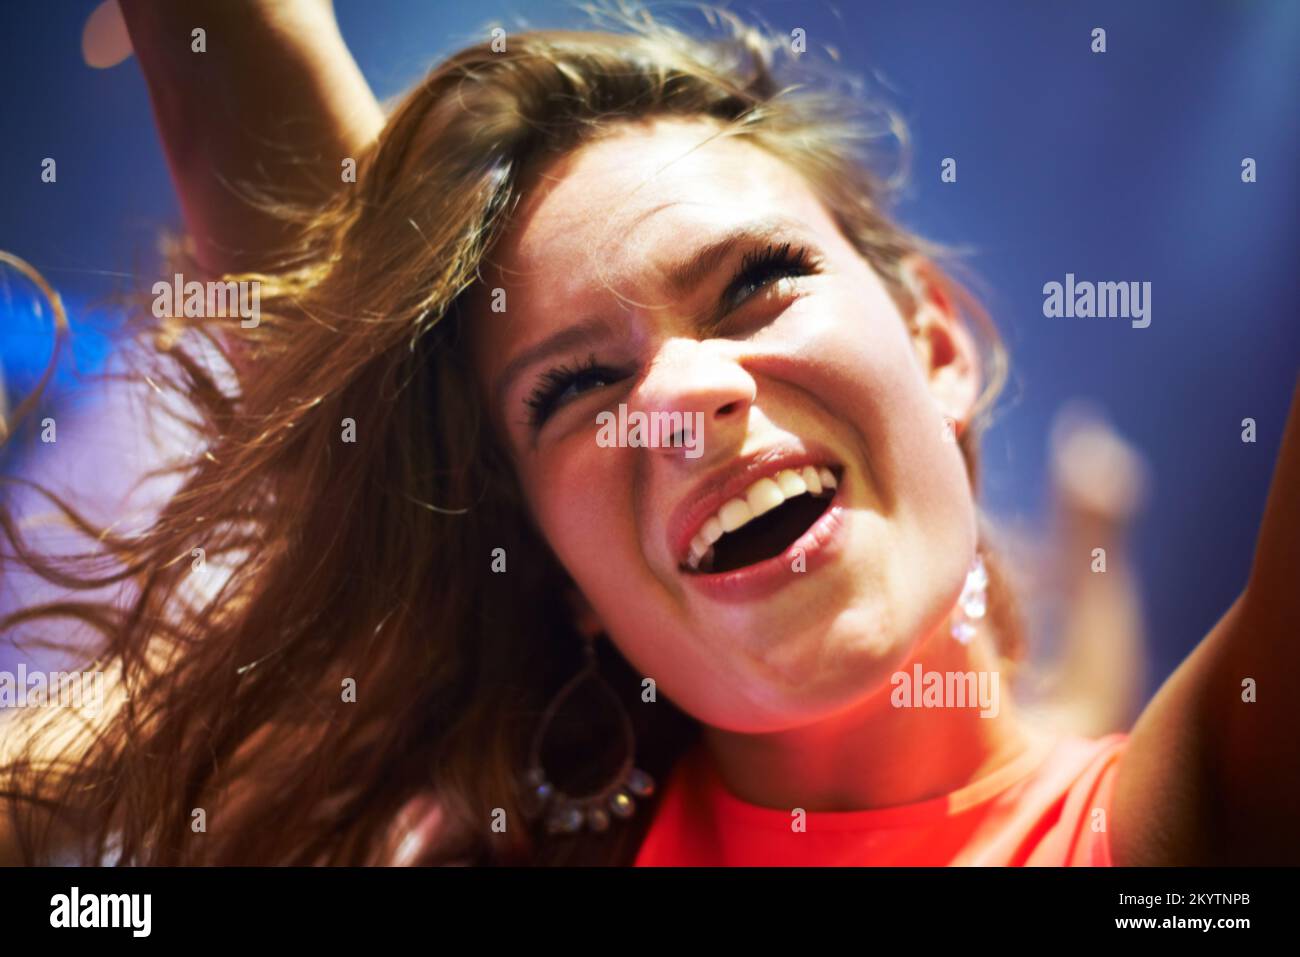 Dance, music and happy with woman at concert for party, nightclub and festival dj event. Disco, rock and freedom with girl dancing in crowd of fans Stock Photo